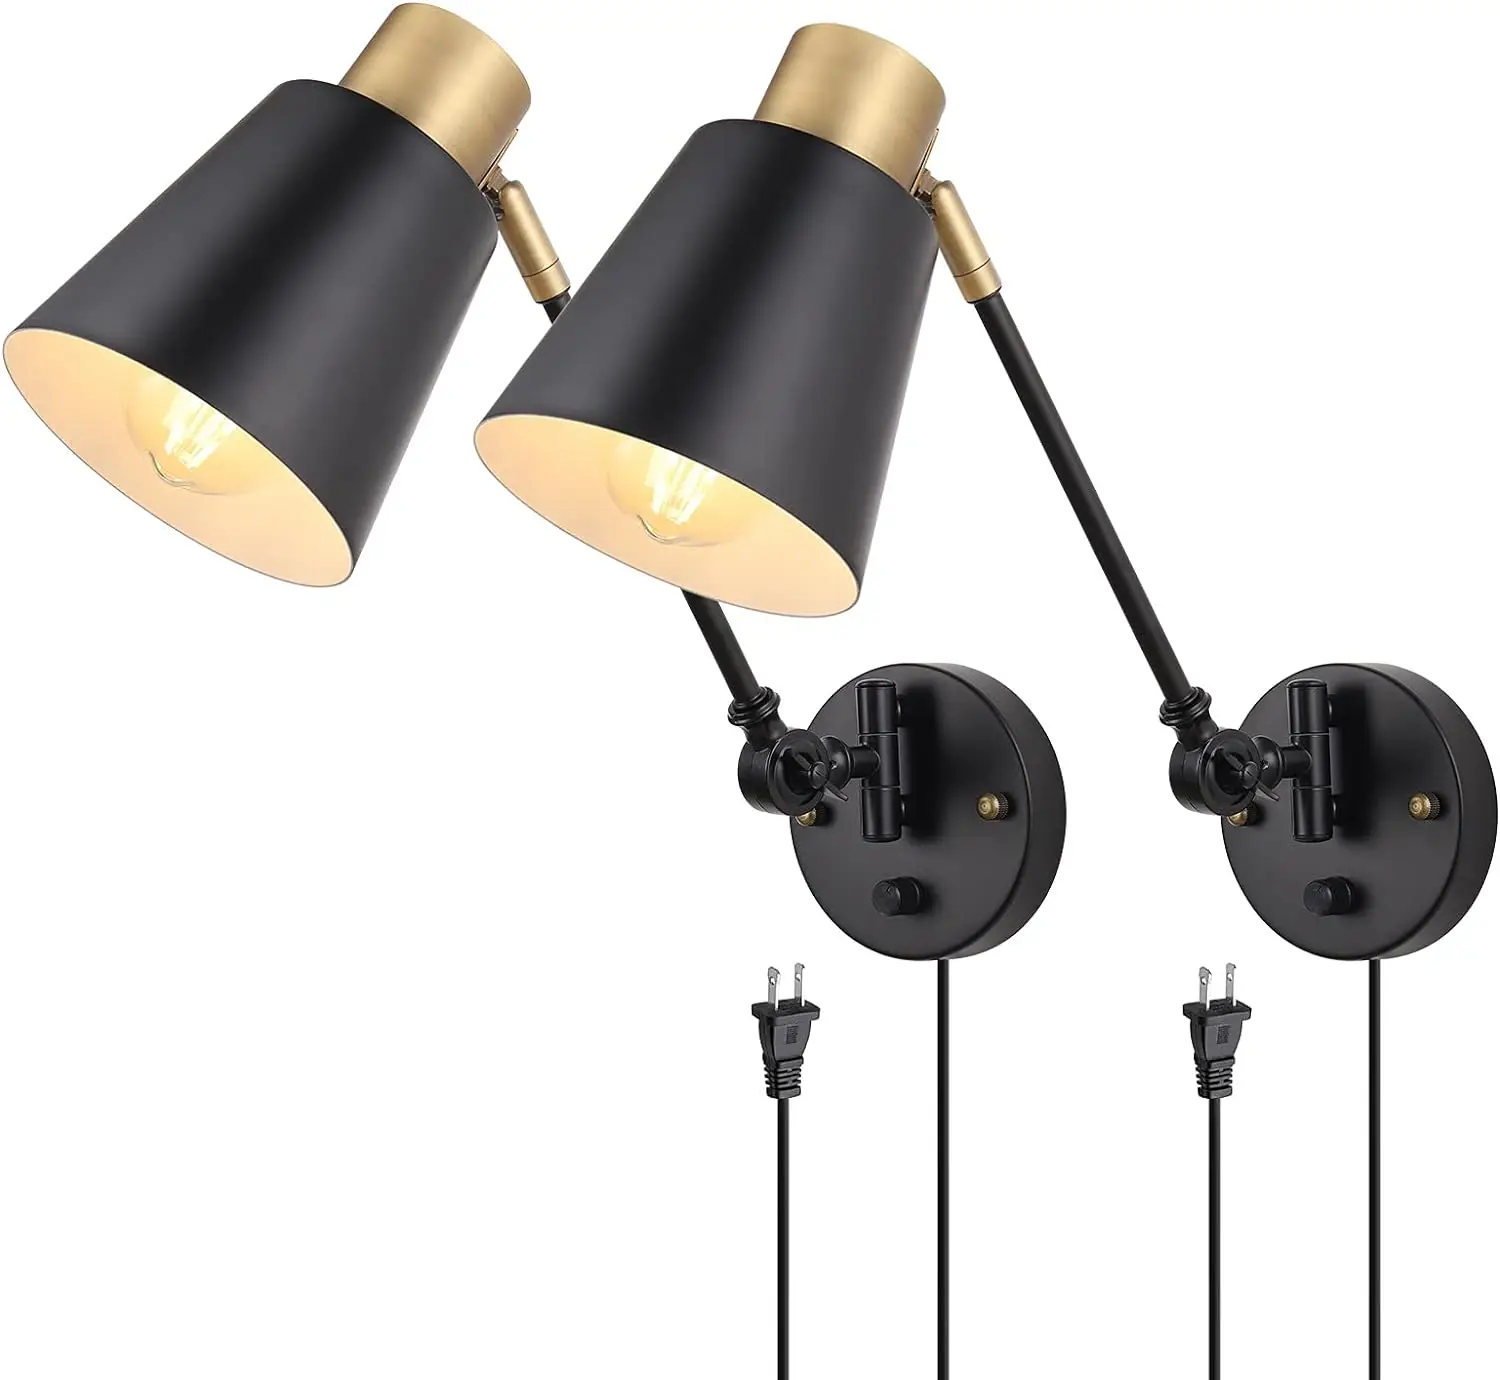 

Lamp with Plug in Cord, Plug in Sconces Set of Two, Swing Arm Sconces Lighting with On Off Switch, Metal Black Brass Industri